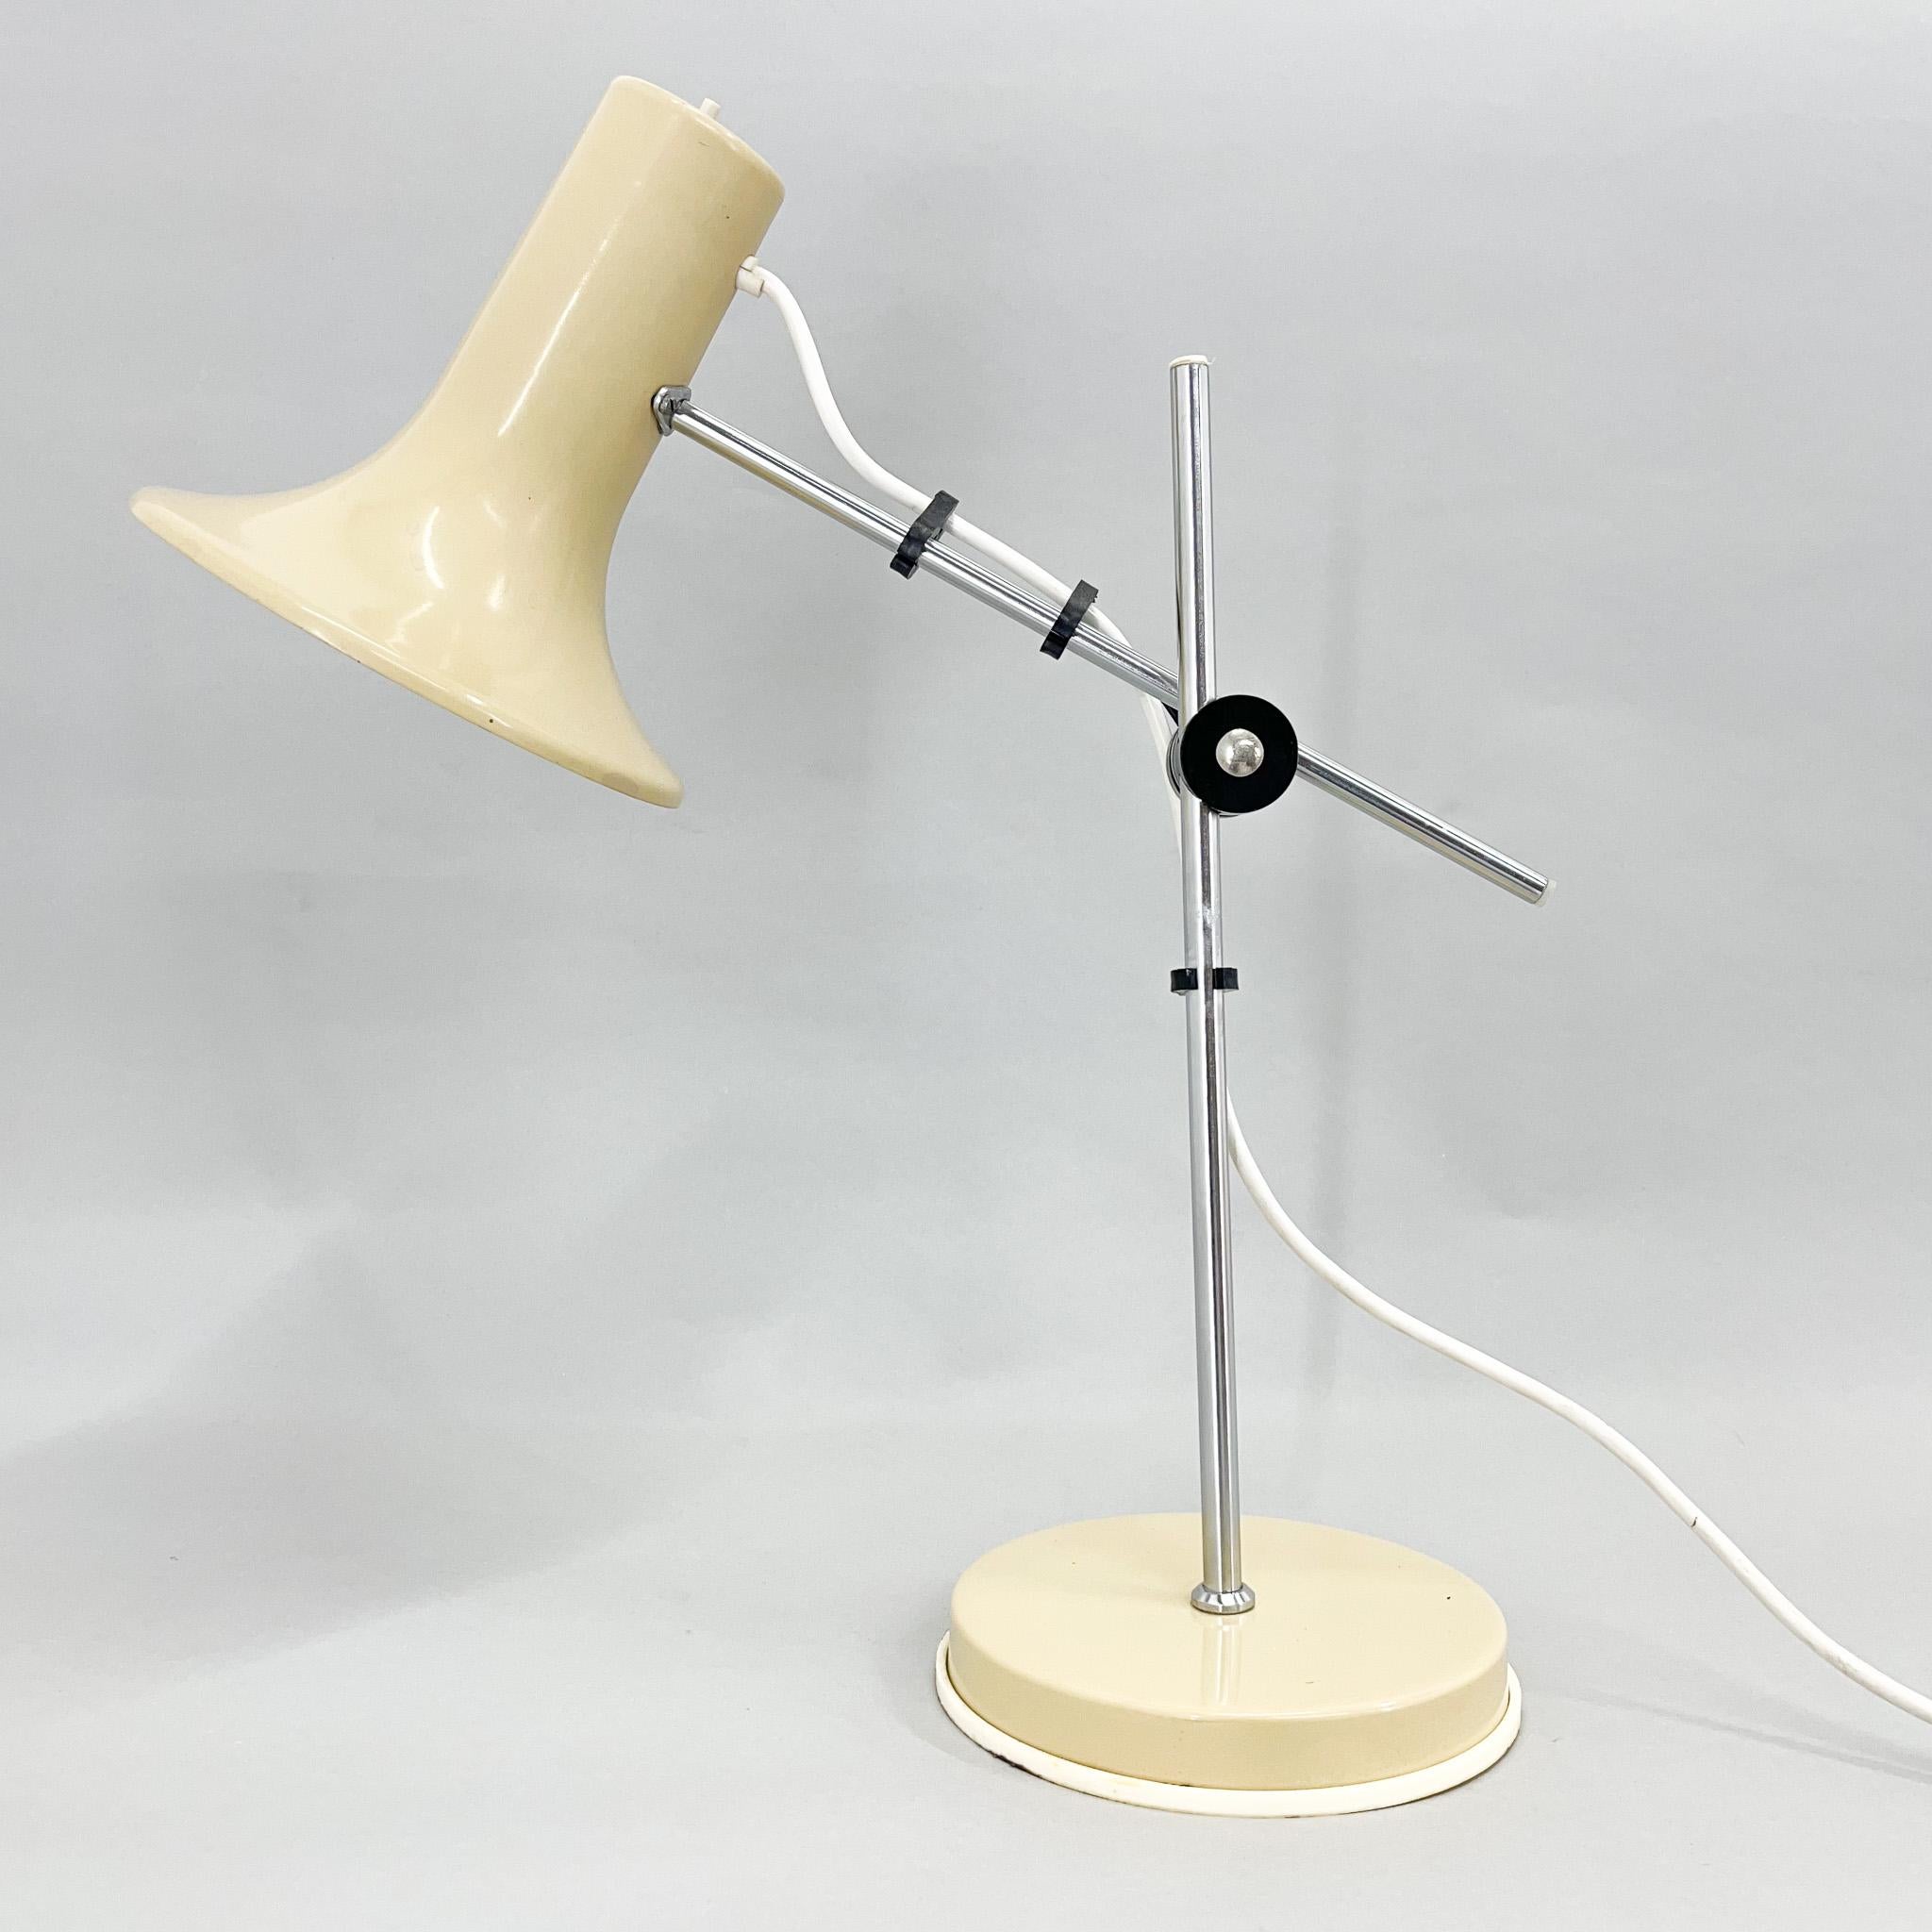 1970s Adjustable Metal Table Lamp in Creamy Color, Hungary For Sale 6